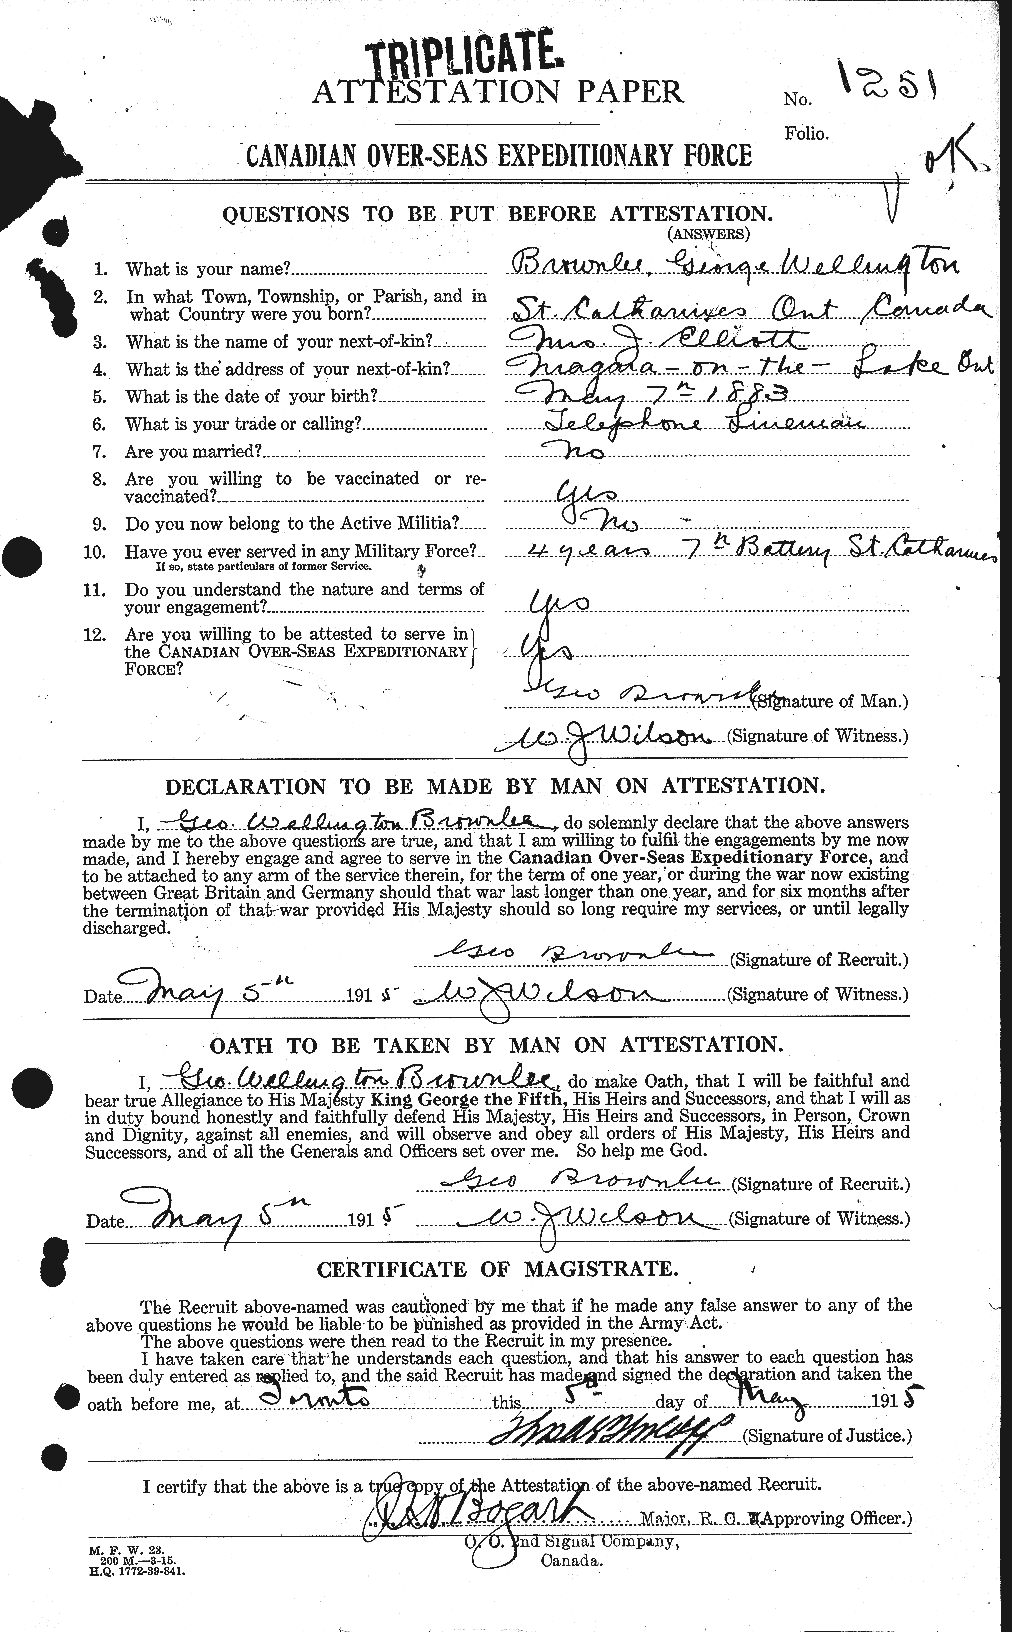 Personnel Records of the First World War - CEF 267562a